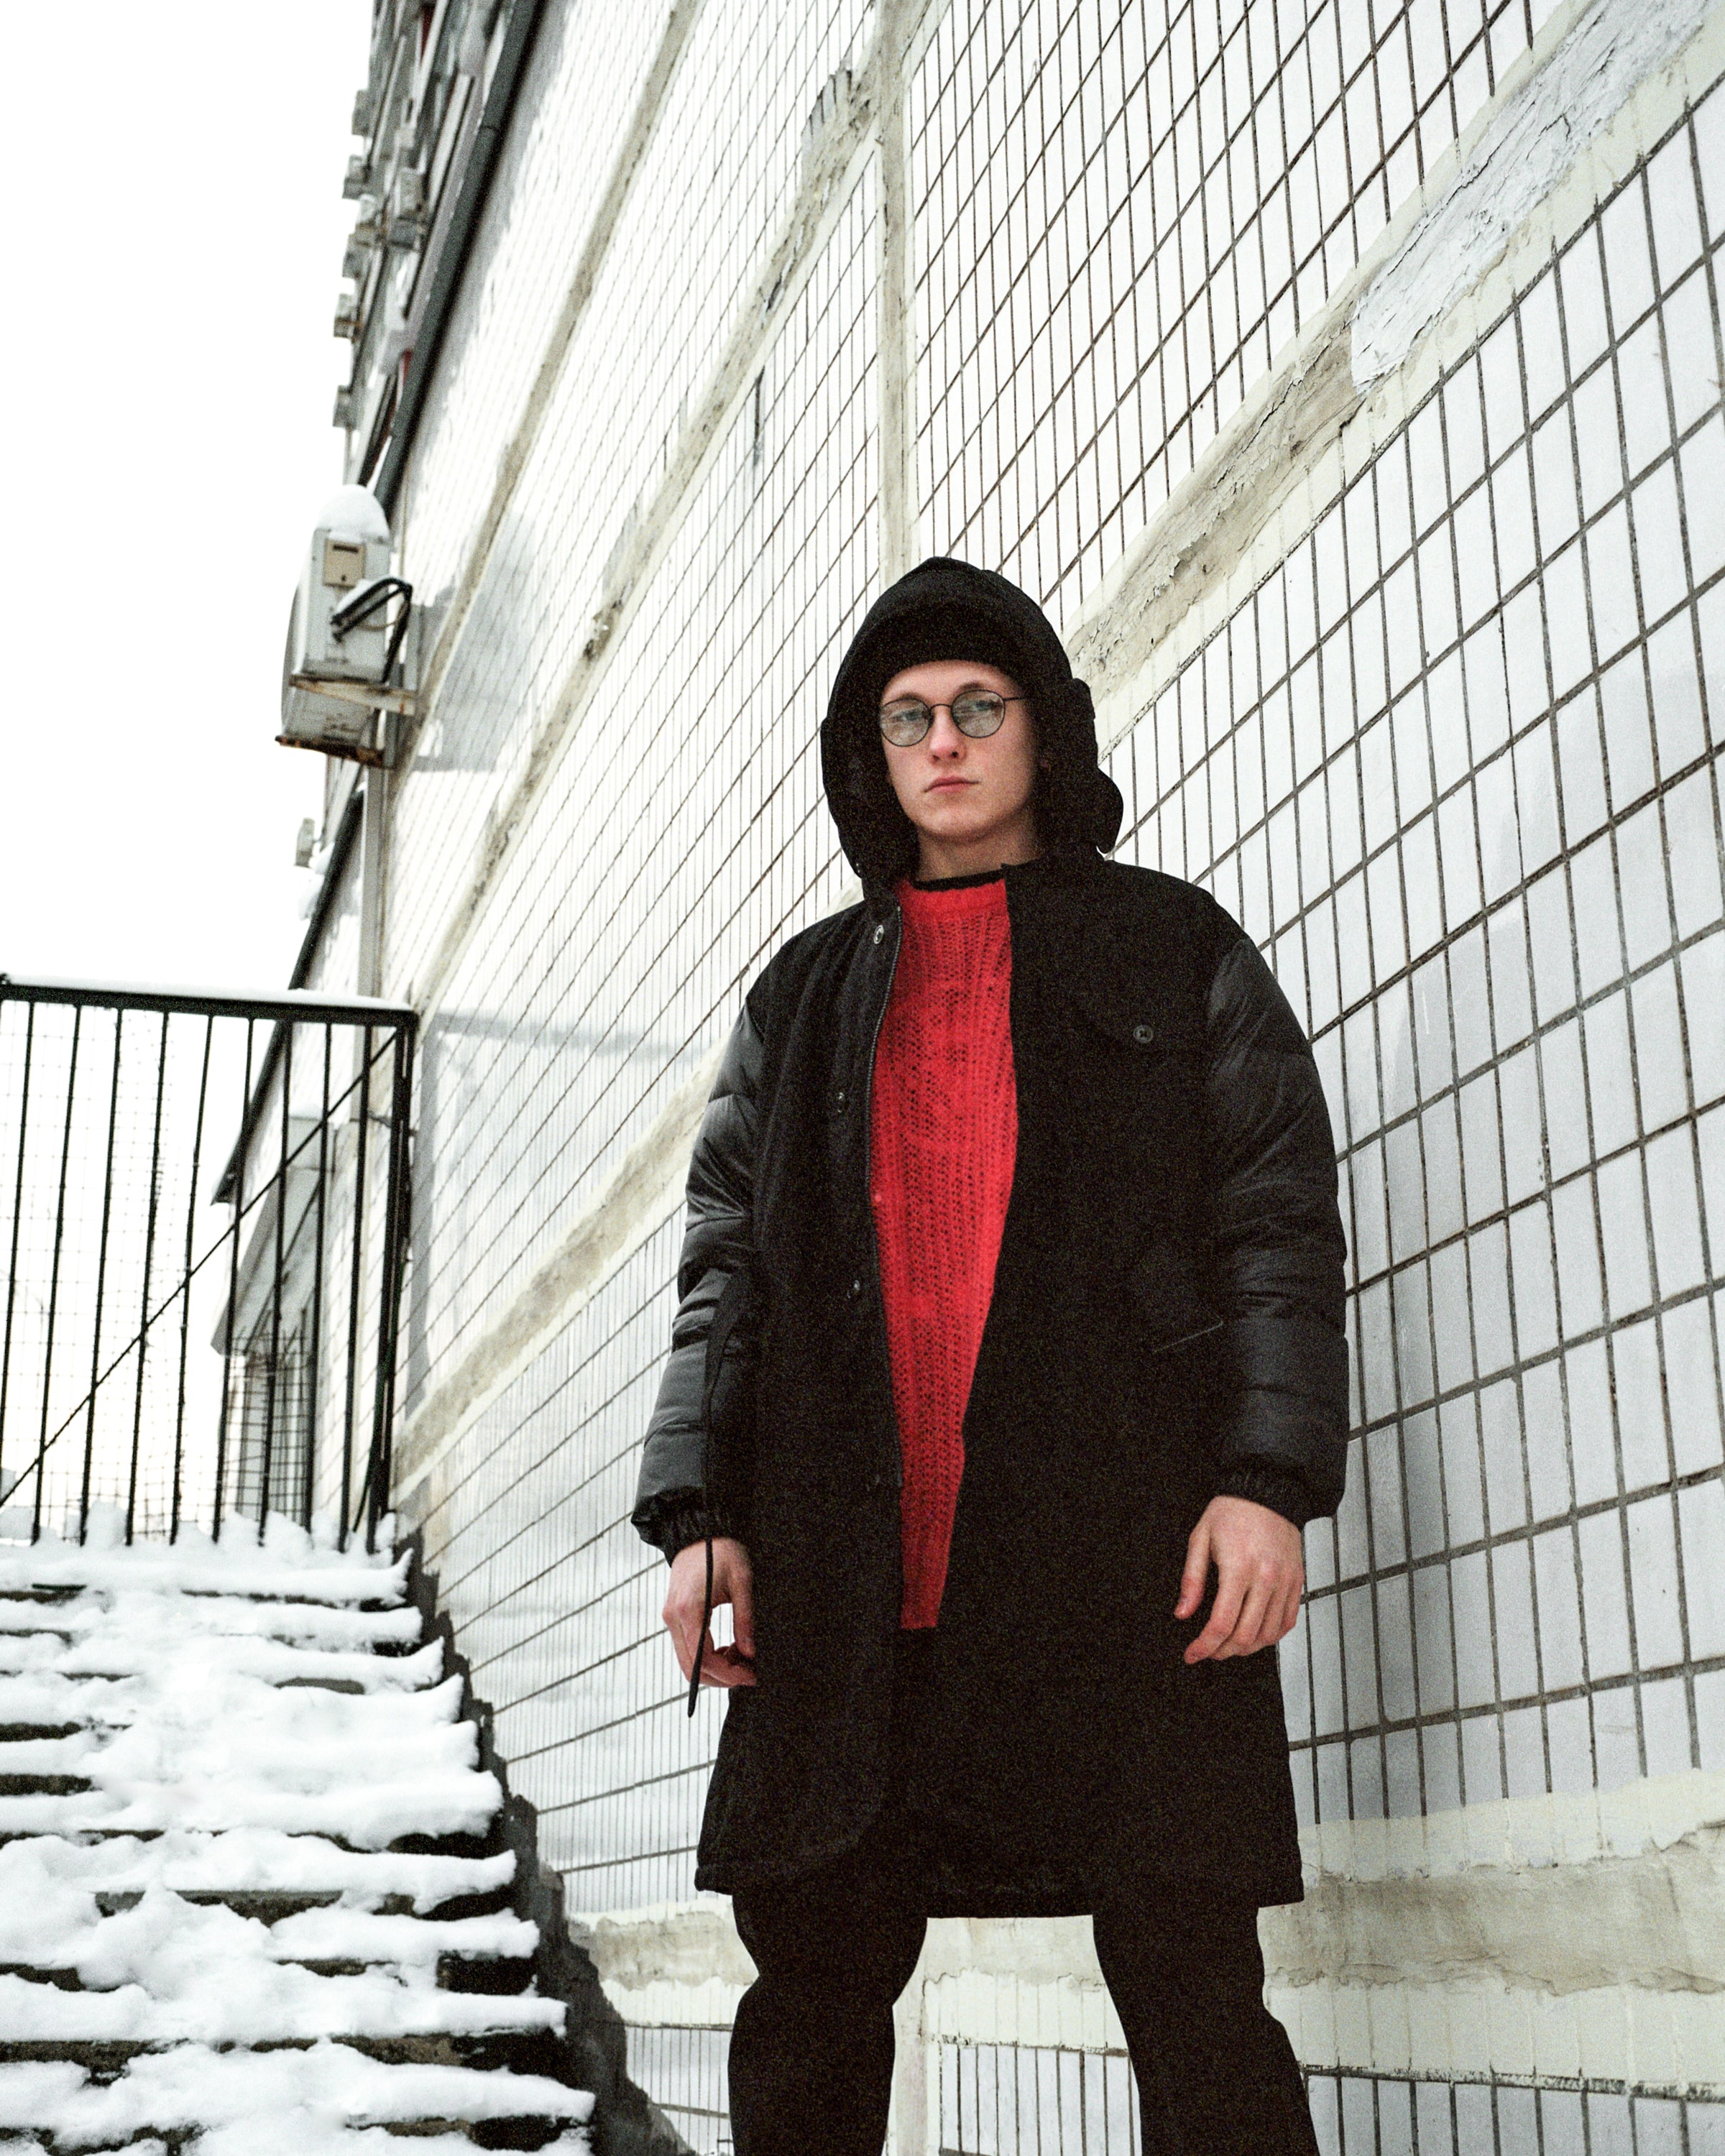 Belief Moscow Highlights Everyday Life in 'Specimen' Editorial 